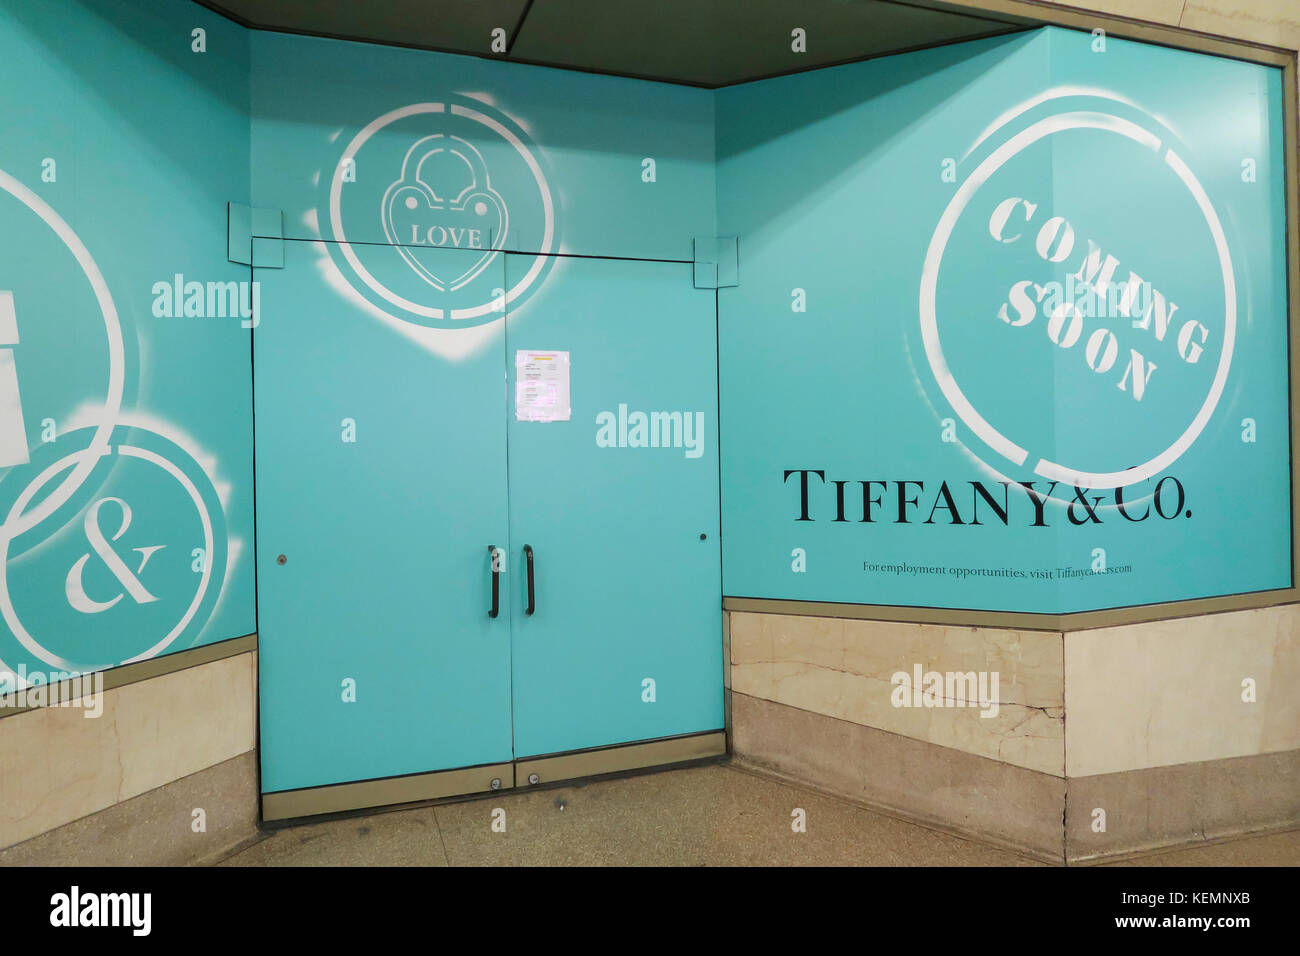 Tiffany & Co. Melden Sie sich in Grand Central Terminal, NYC, USA an Stockfoto